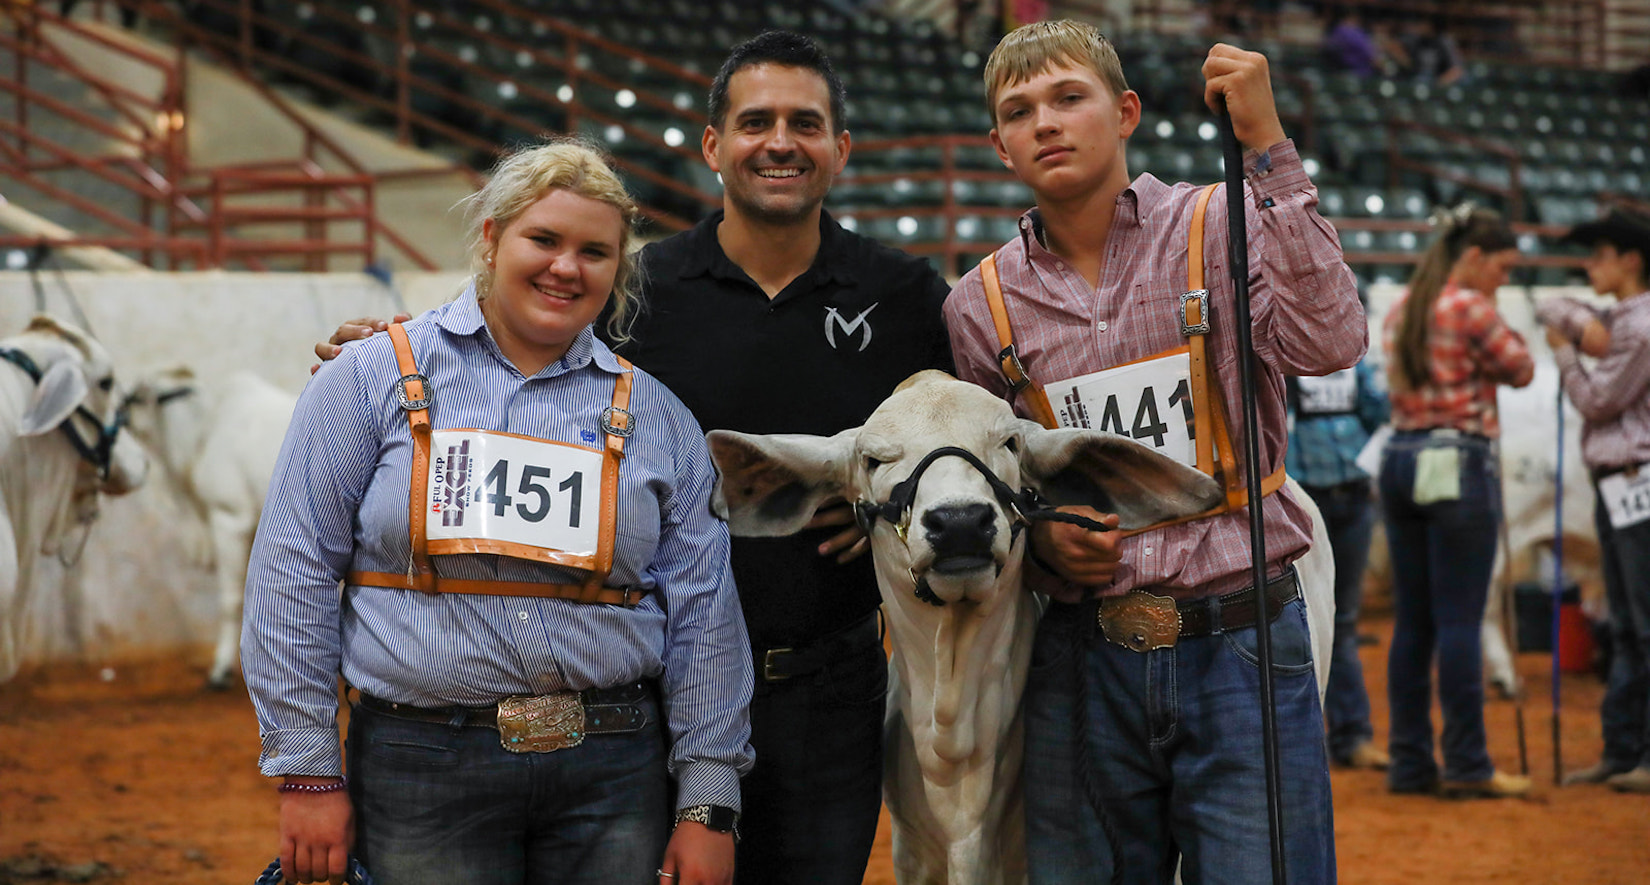 Results of the 2021 All-American National Junior Brahman Cattle Show